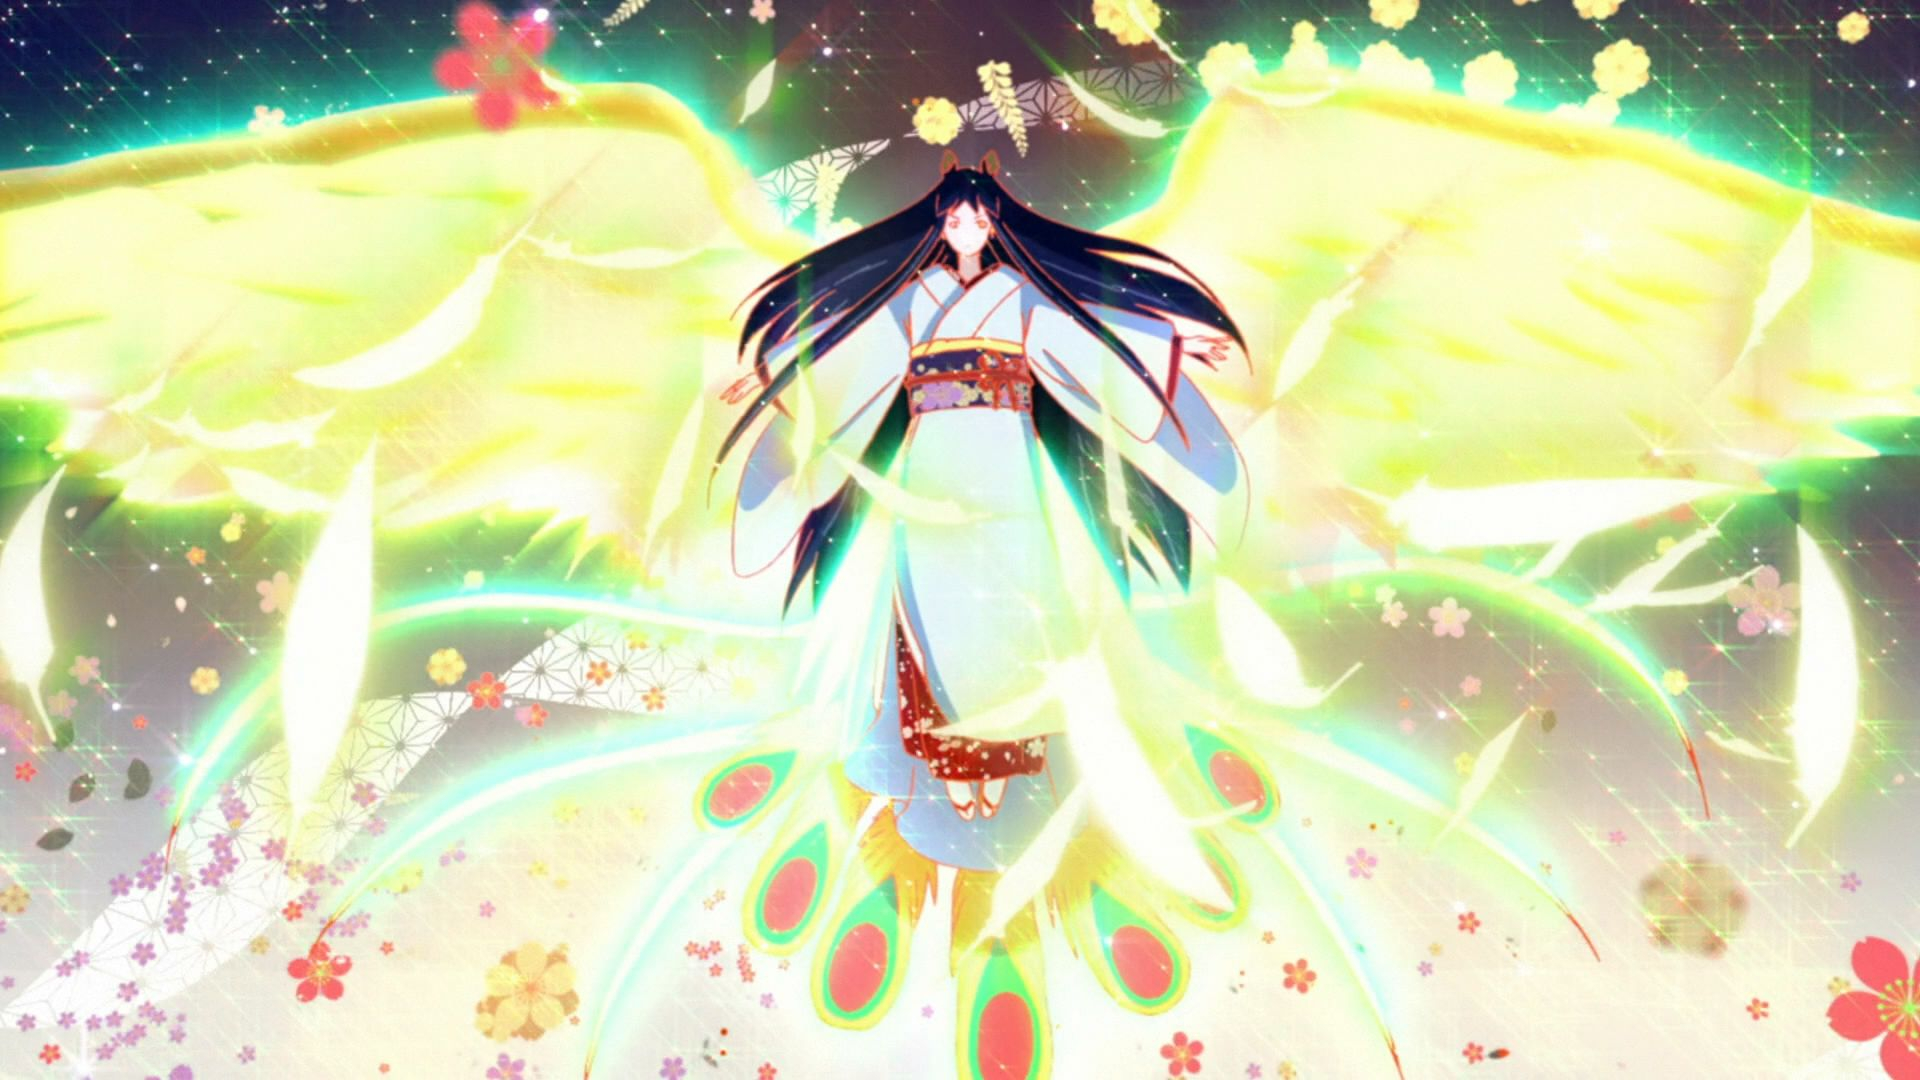 1920x1080 Final Anime Thoughts and Summary: Summer Wars | Anime films, Anime summer, Anime